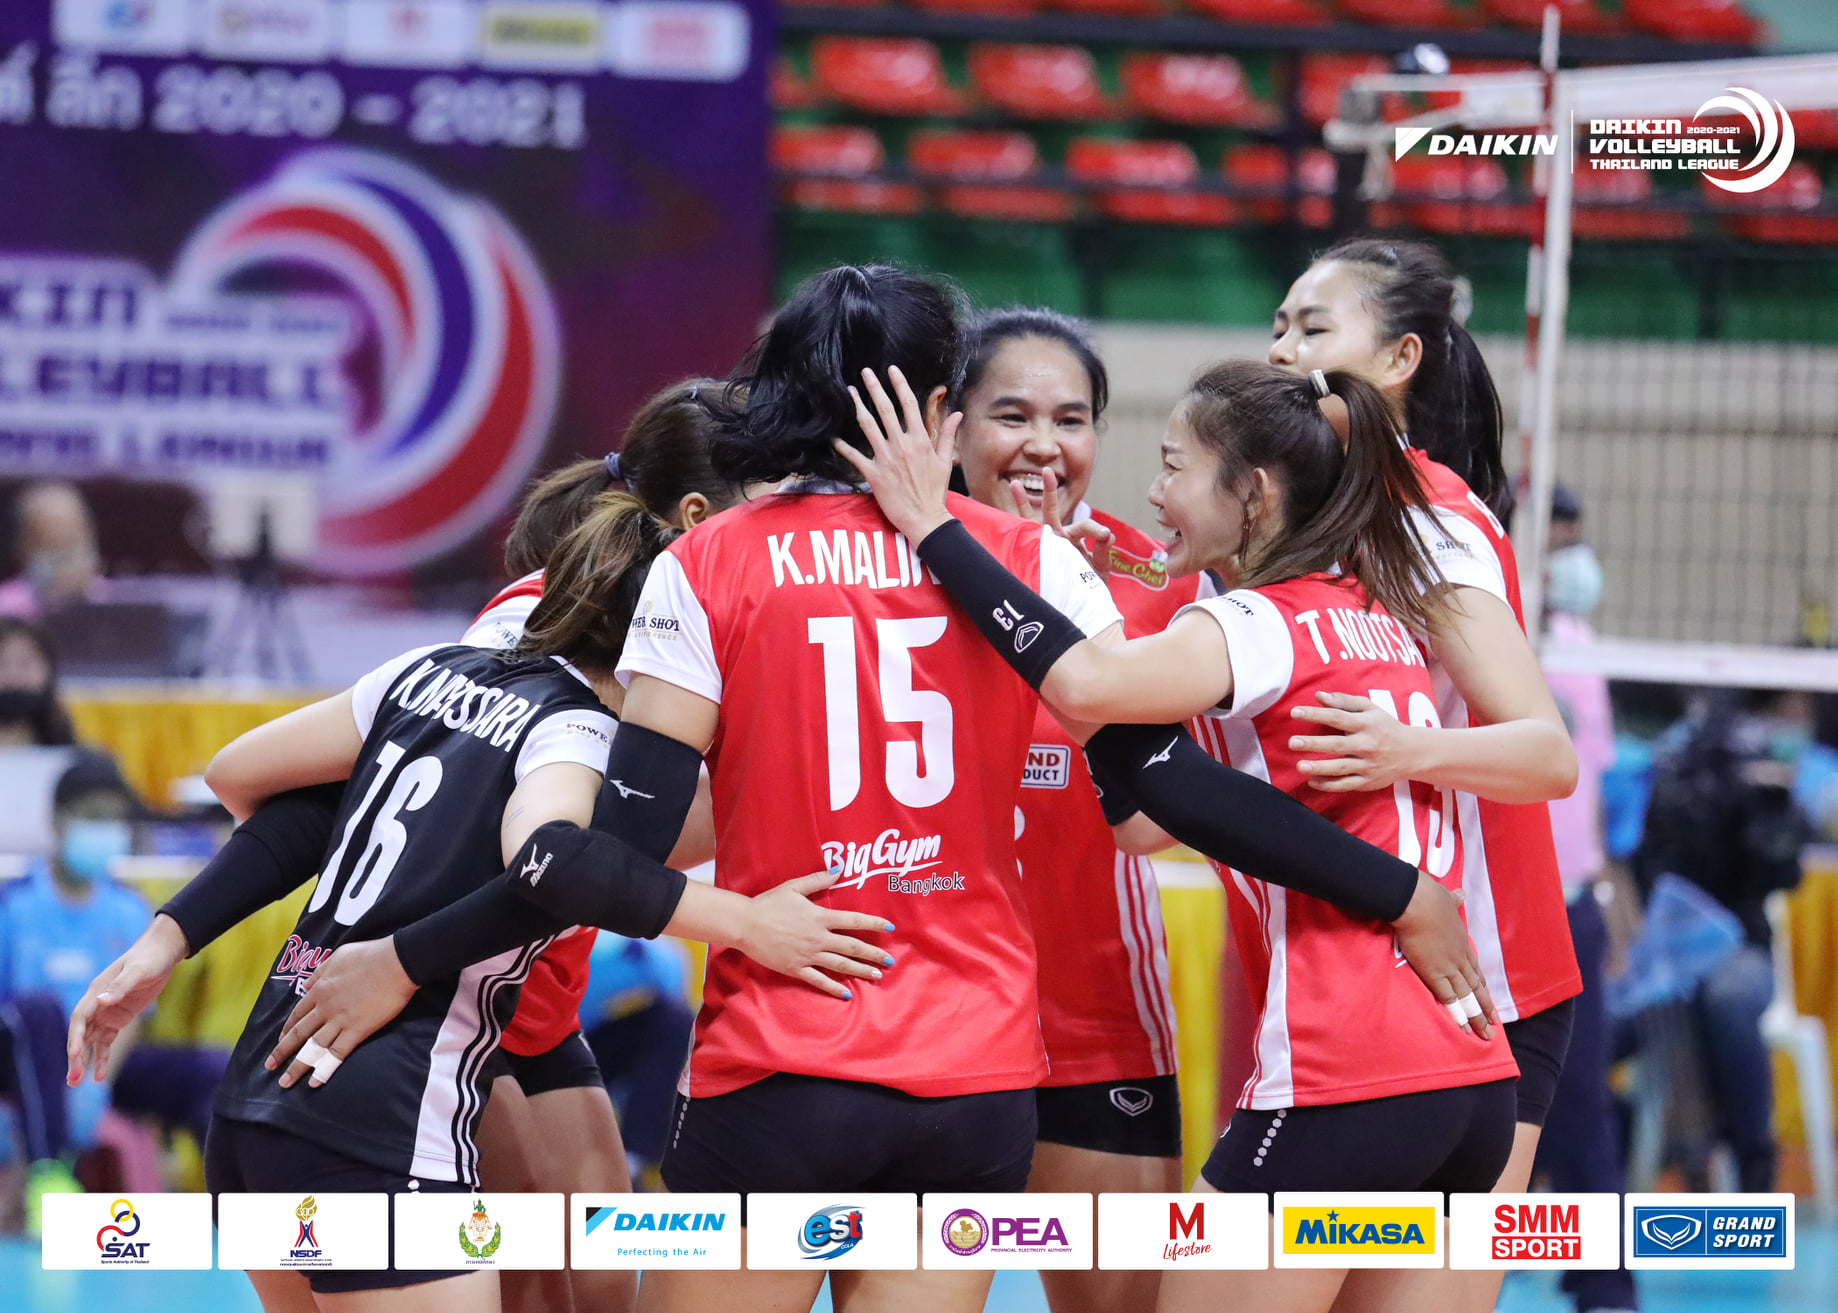 DIAMOND FOOD LEAD THE PACK AT SECOND STAGE OF THAILAND LEAGUE